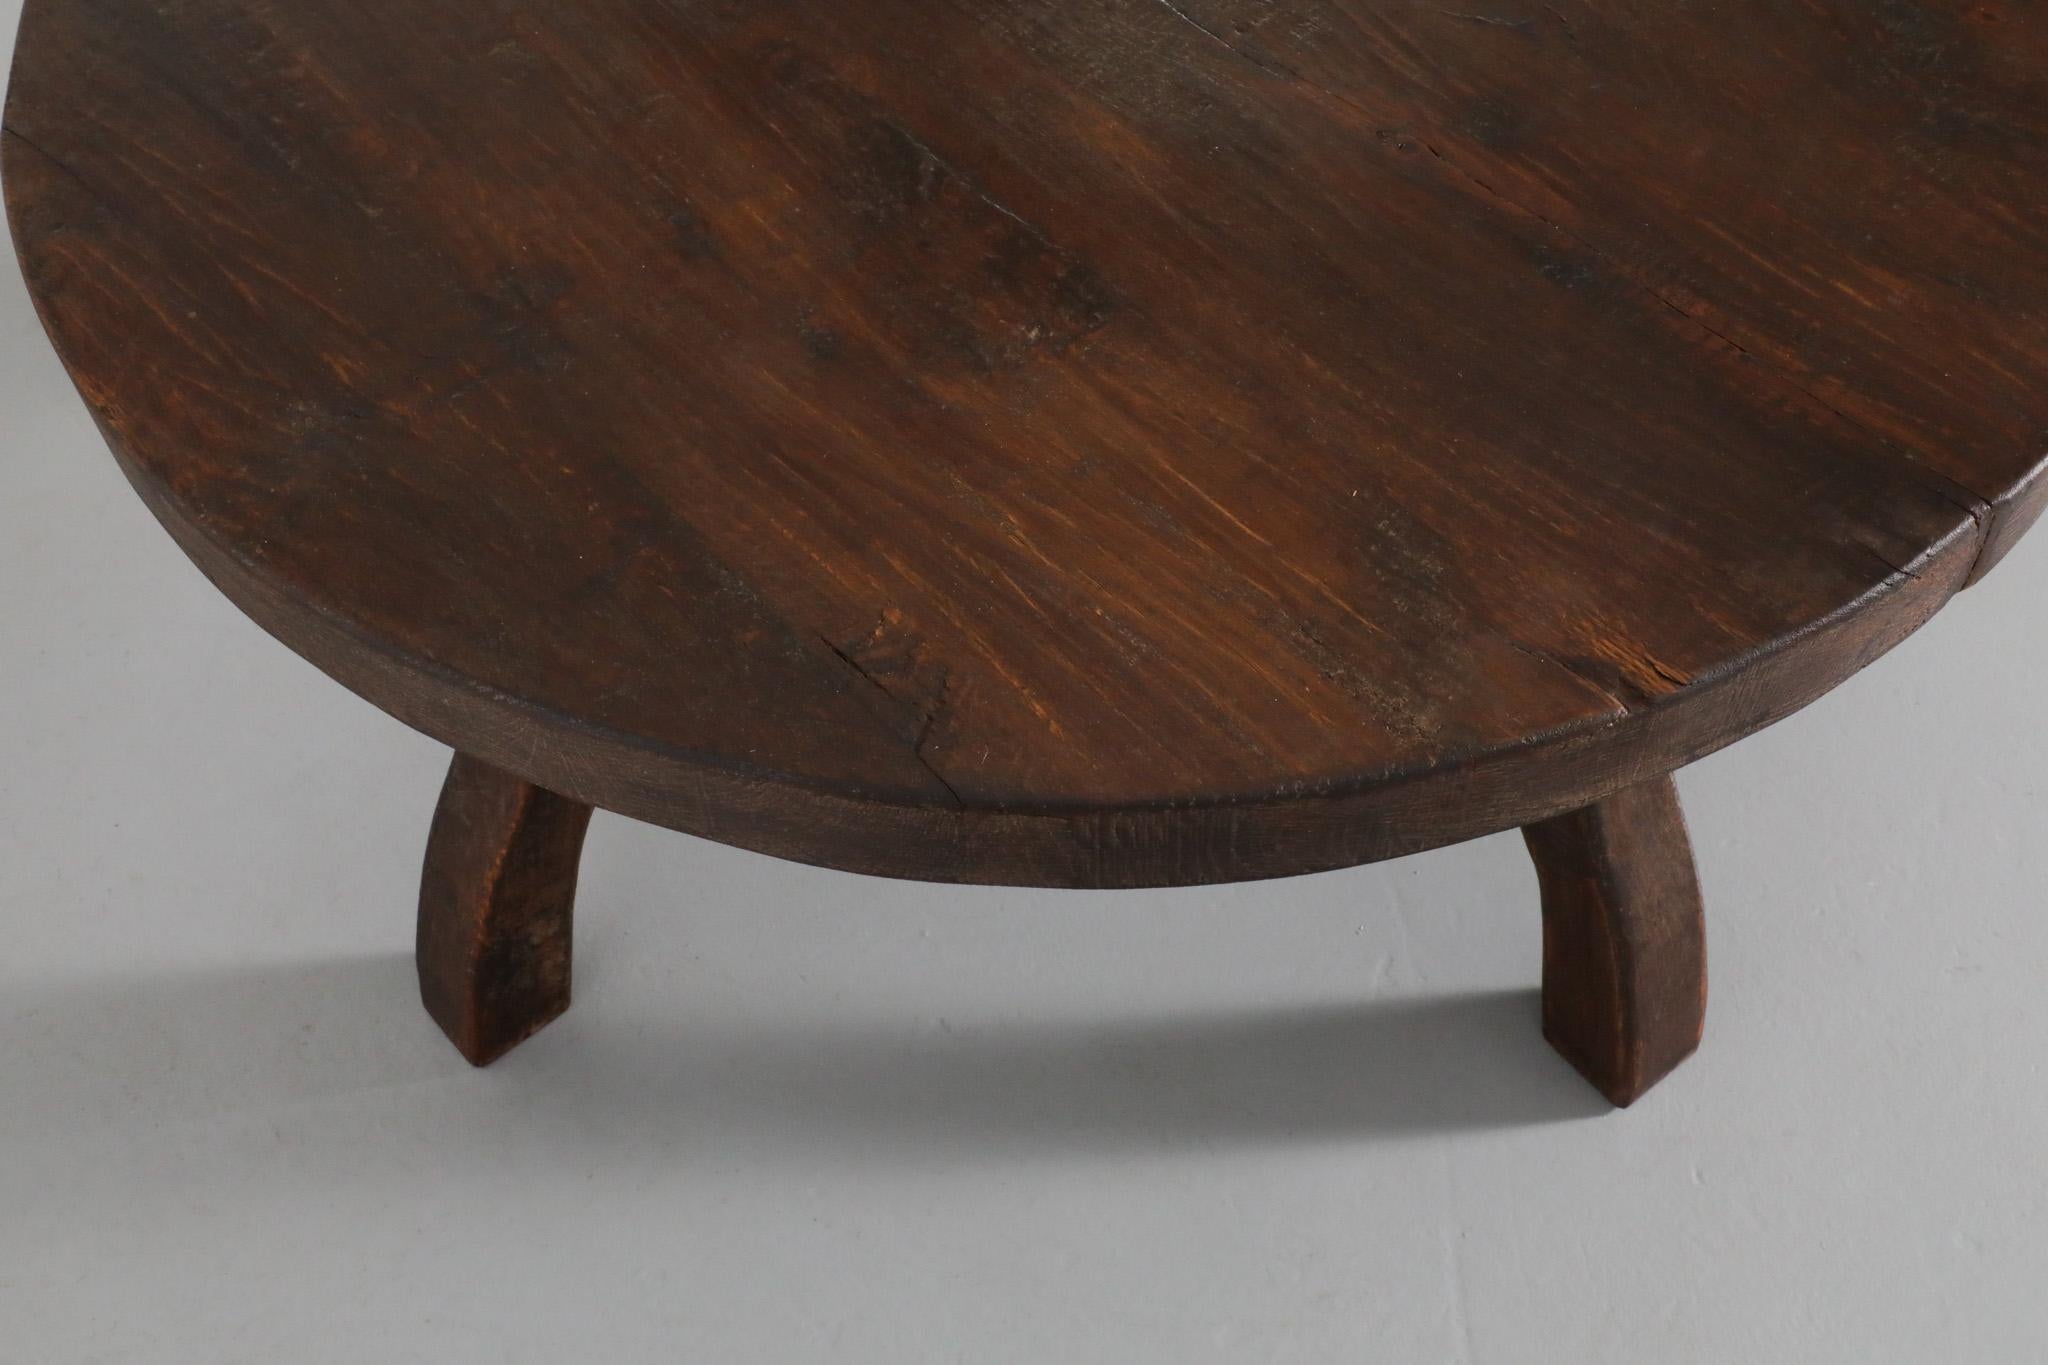 Pierre Chapo Style Brutalist Oak Coffee Table with Curved Legs For Sale 5